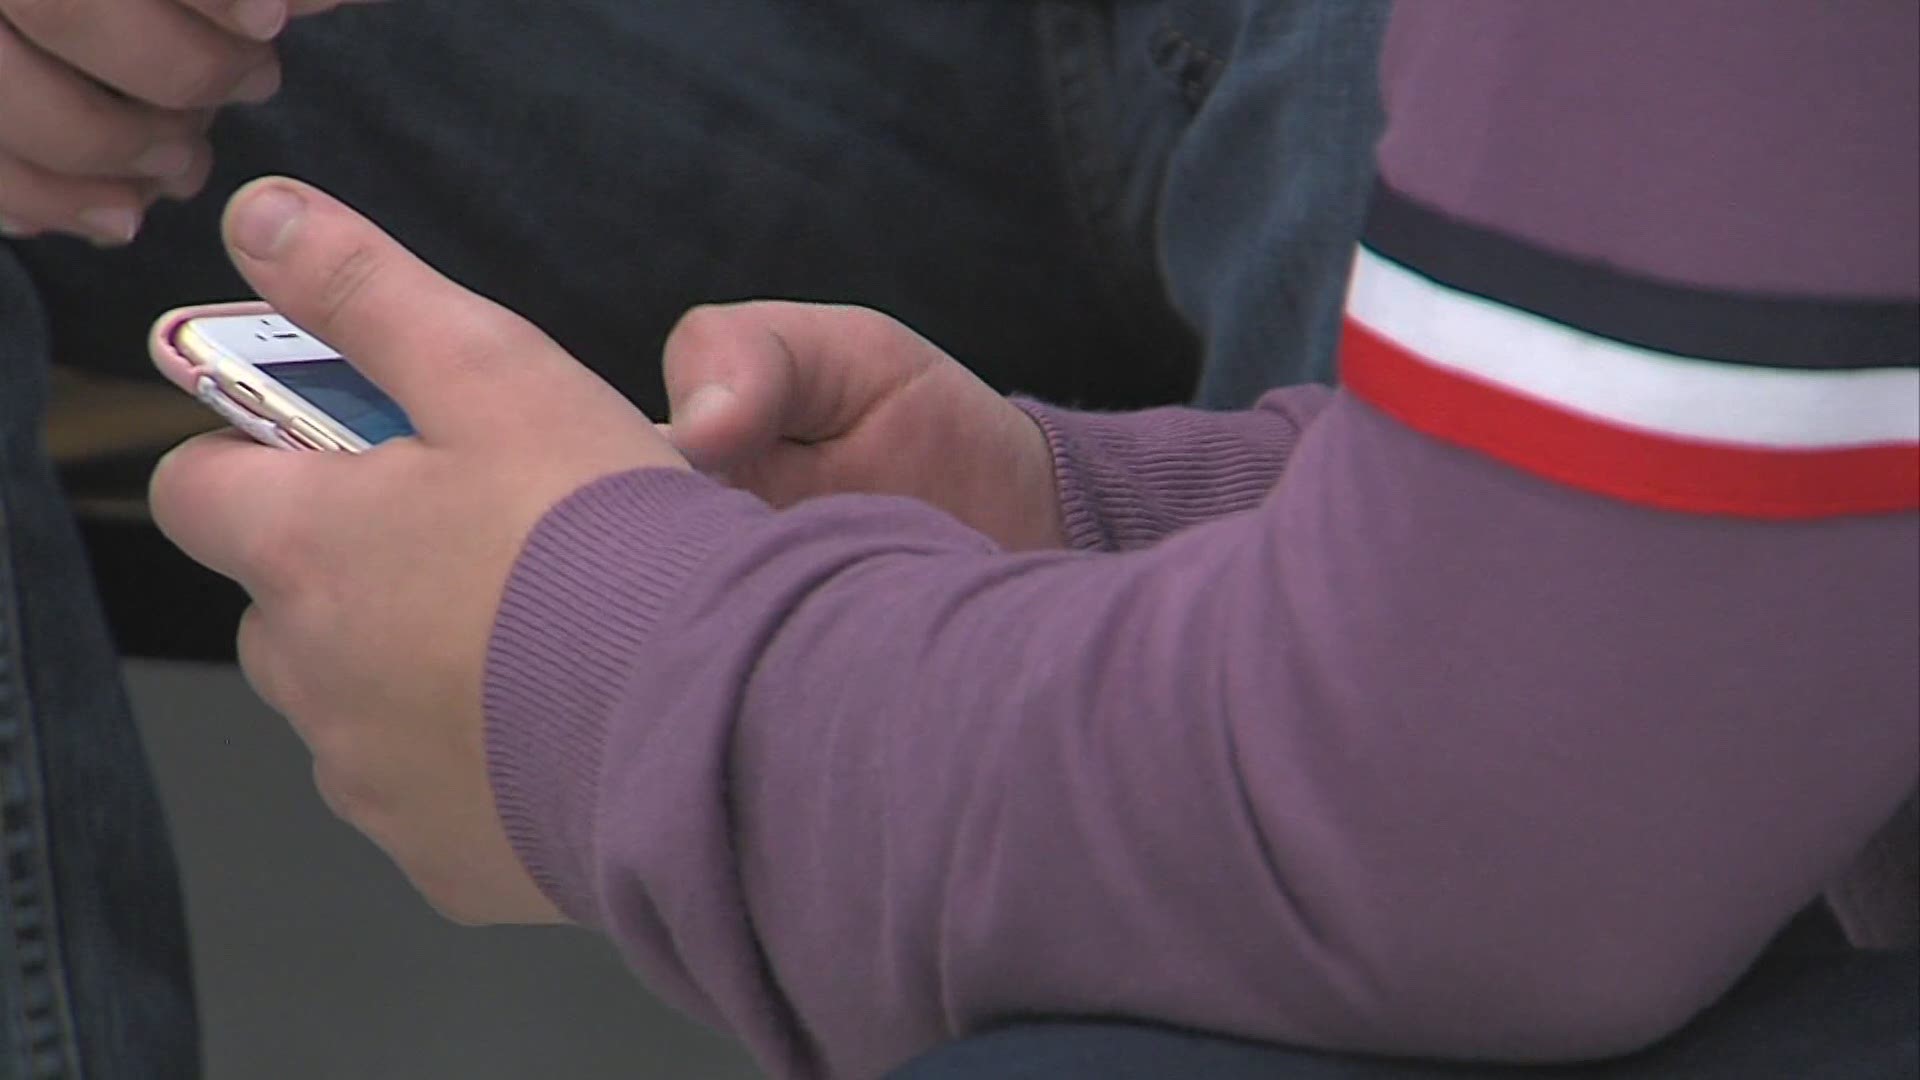 Experts advice on how to get teens away from their phones